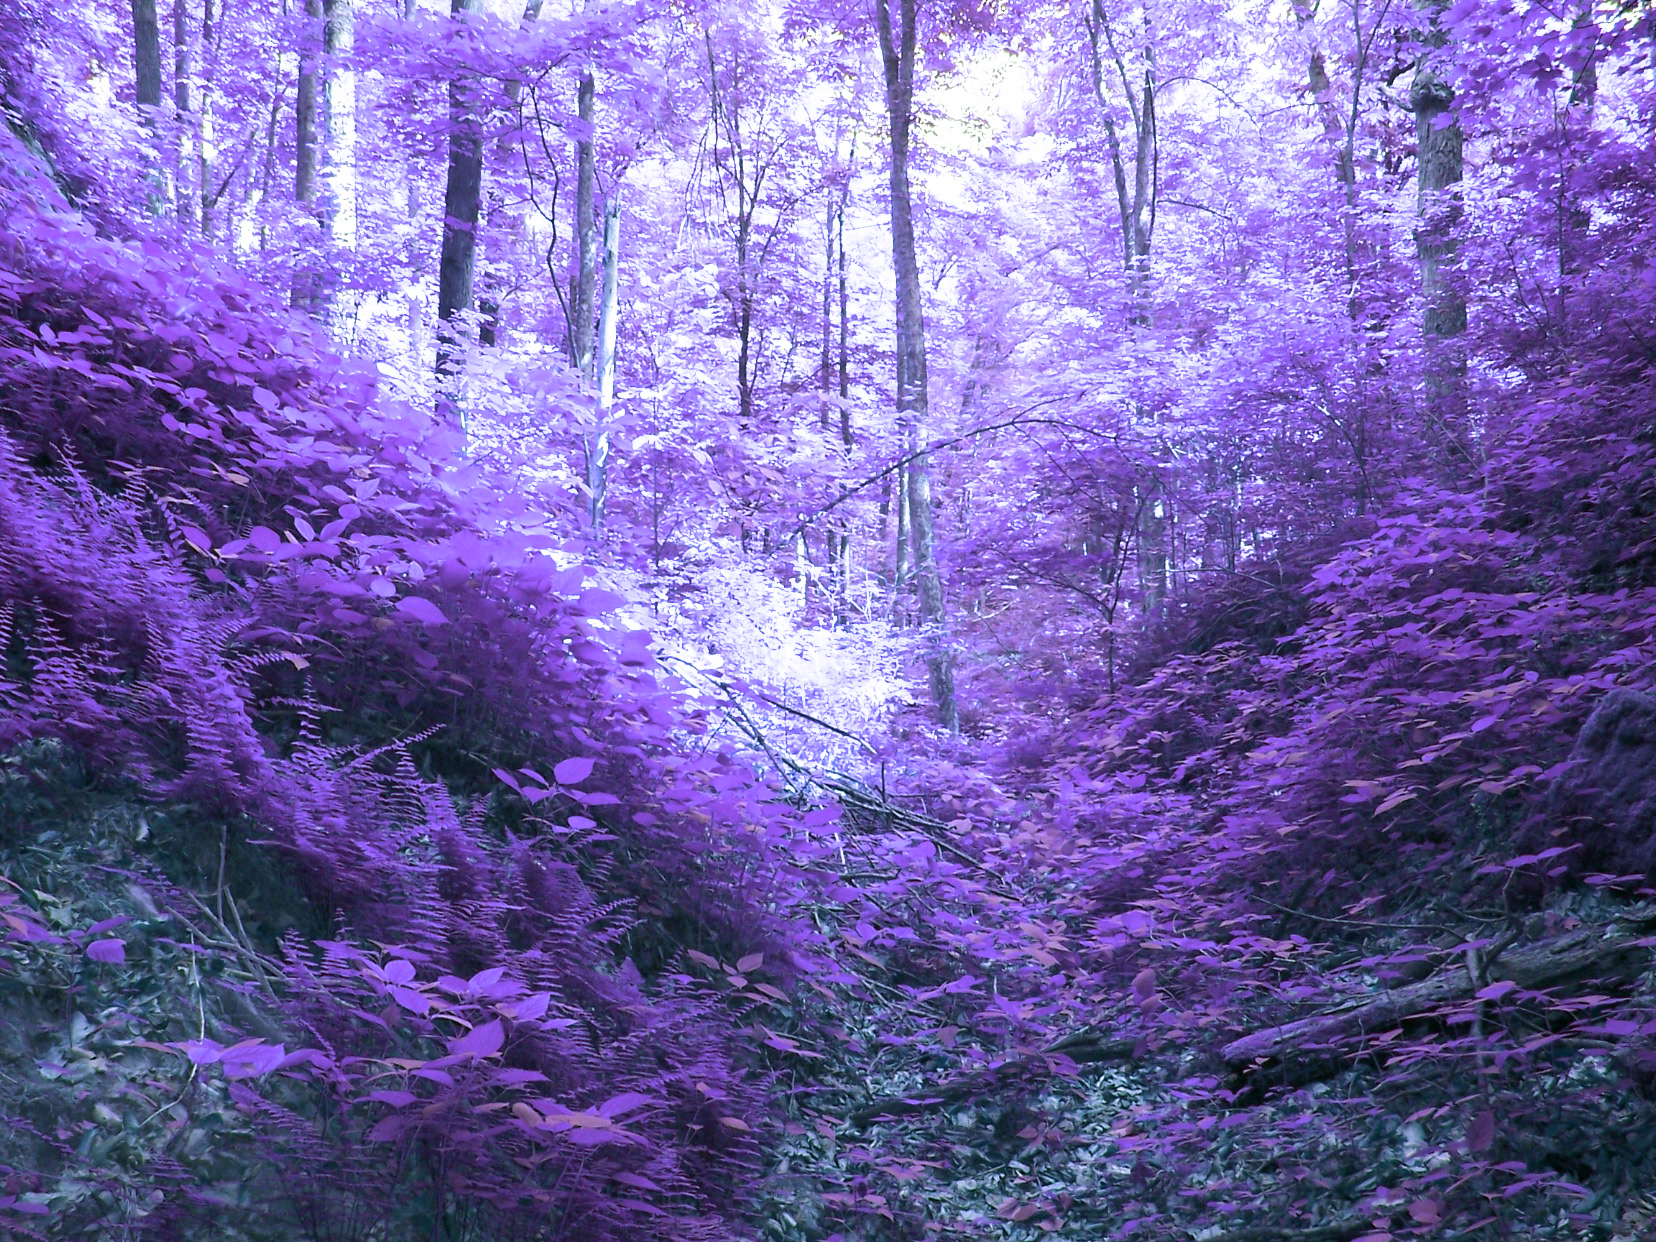 Inverted colors: Forest by homi1408 on DeviantArt